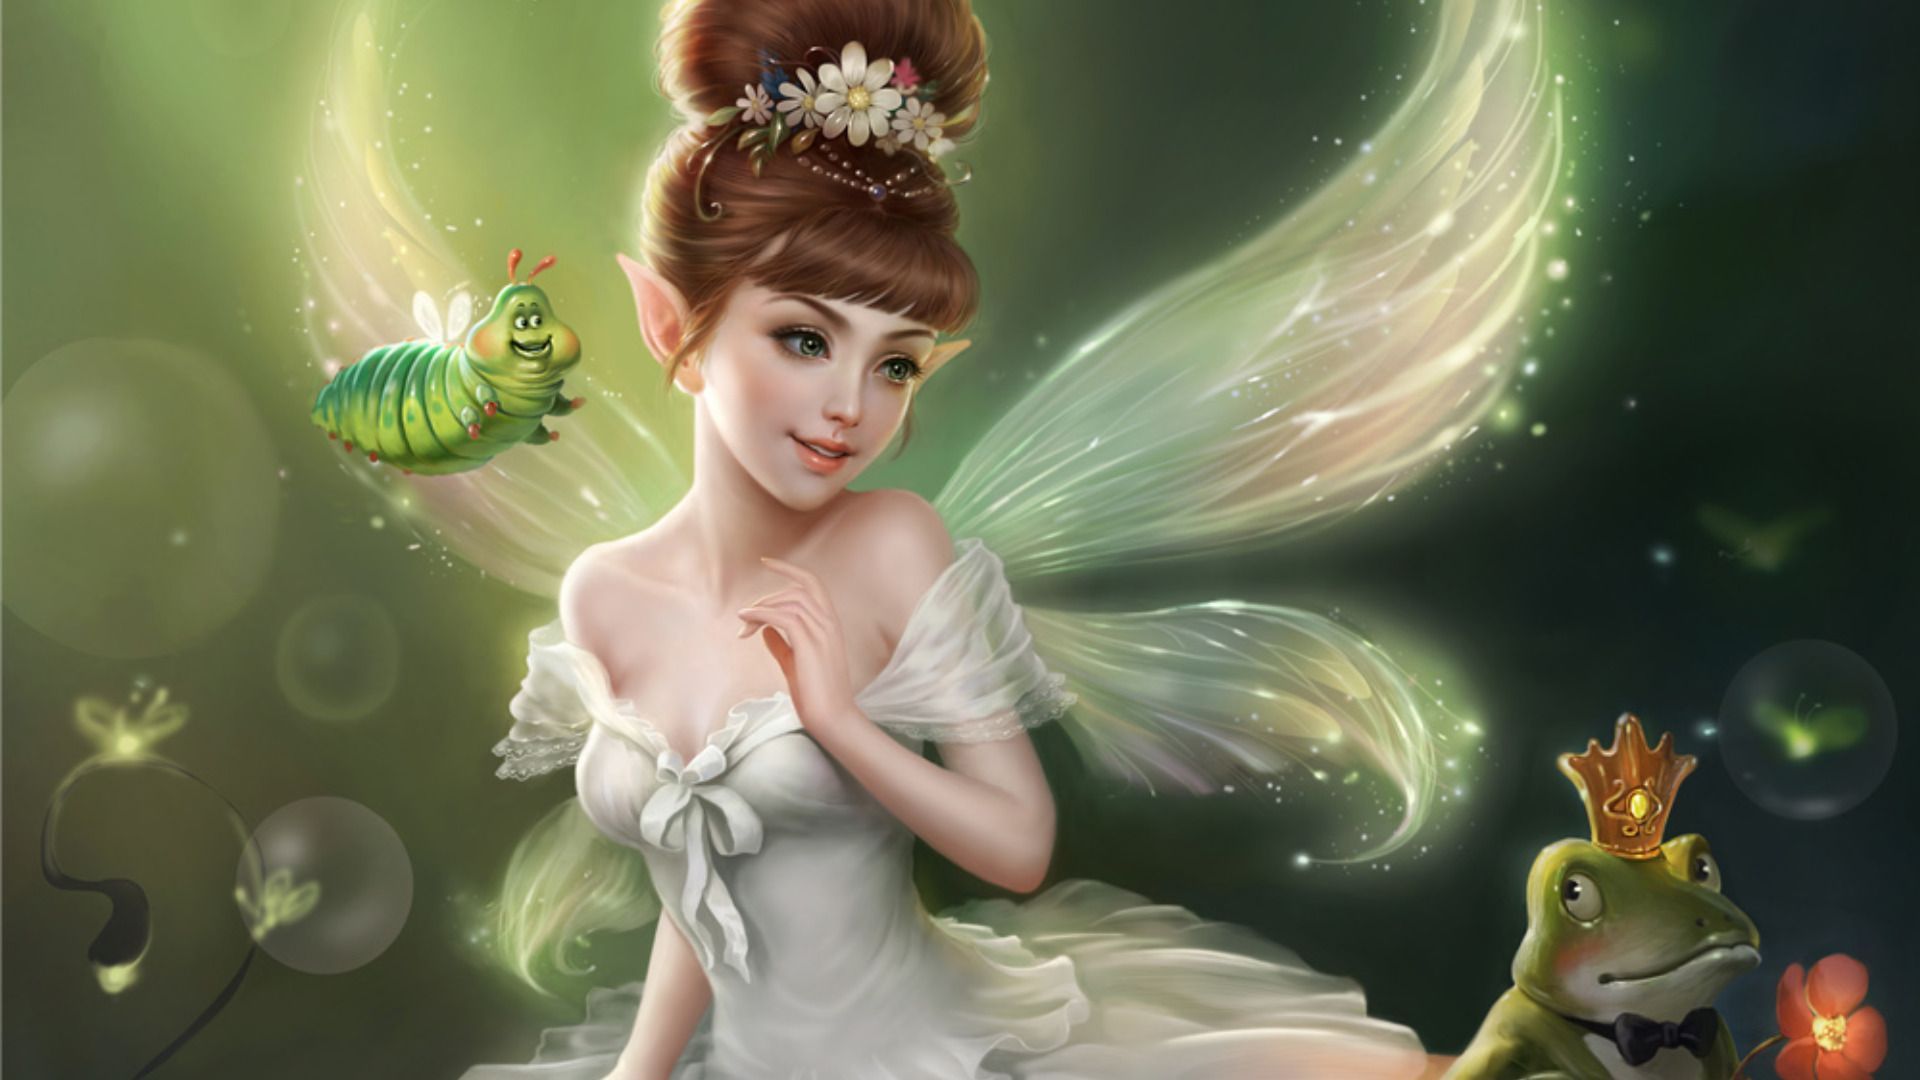 Free Fairy Wallpapers For Desktop - Wallpaper Cave